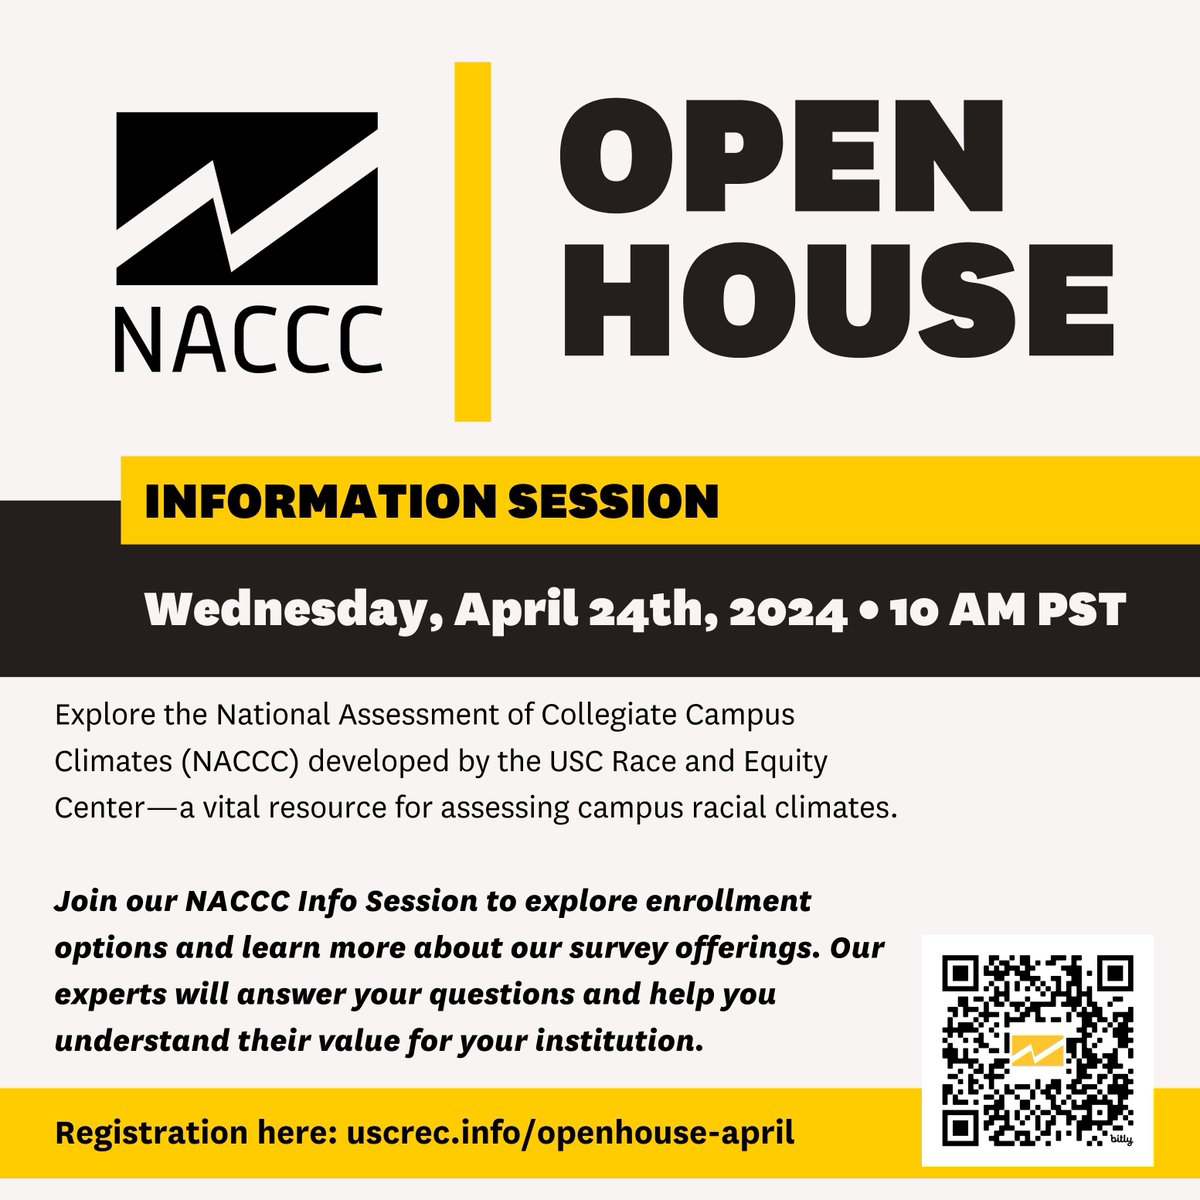 Interested in taking part of an #assessment for #campus climate? DON'T MISS OUT THIS WEDNESDAY! Join our info session 4/24 at 10 am PST. Our NACCC team will guide & answer all your questions as you explore your enrollment options. Register at: uscrec.info/openhouse-april